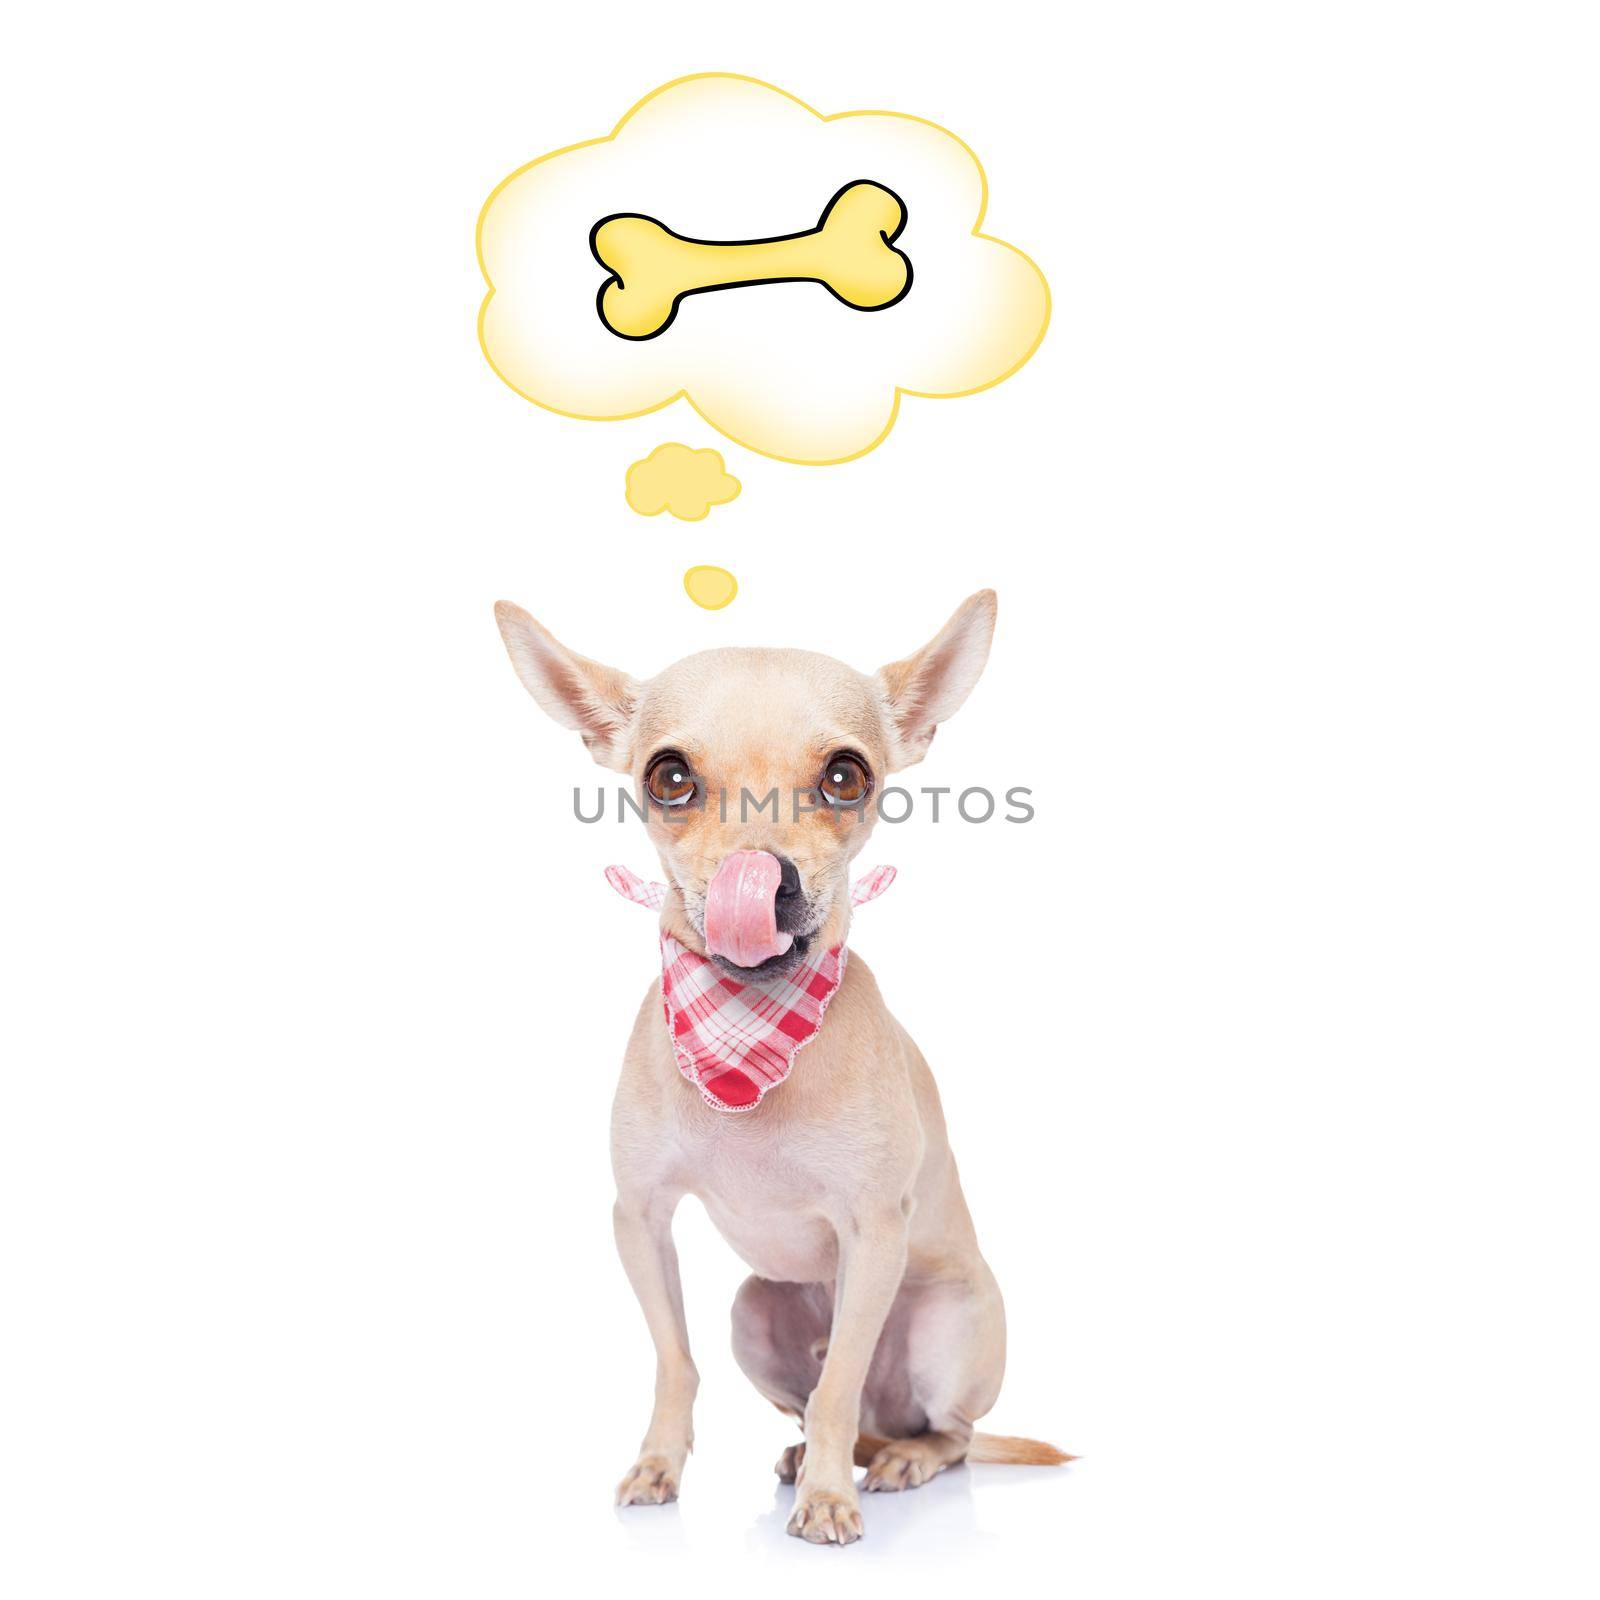 hungry chihuahua dog thinking and hoping of a big bone, in a big speech bubble, isolated on white background